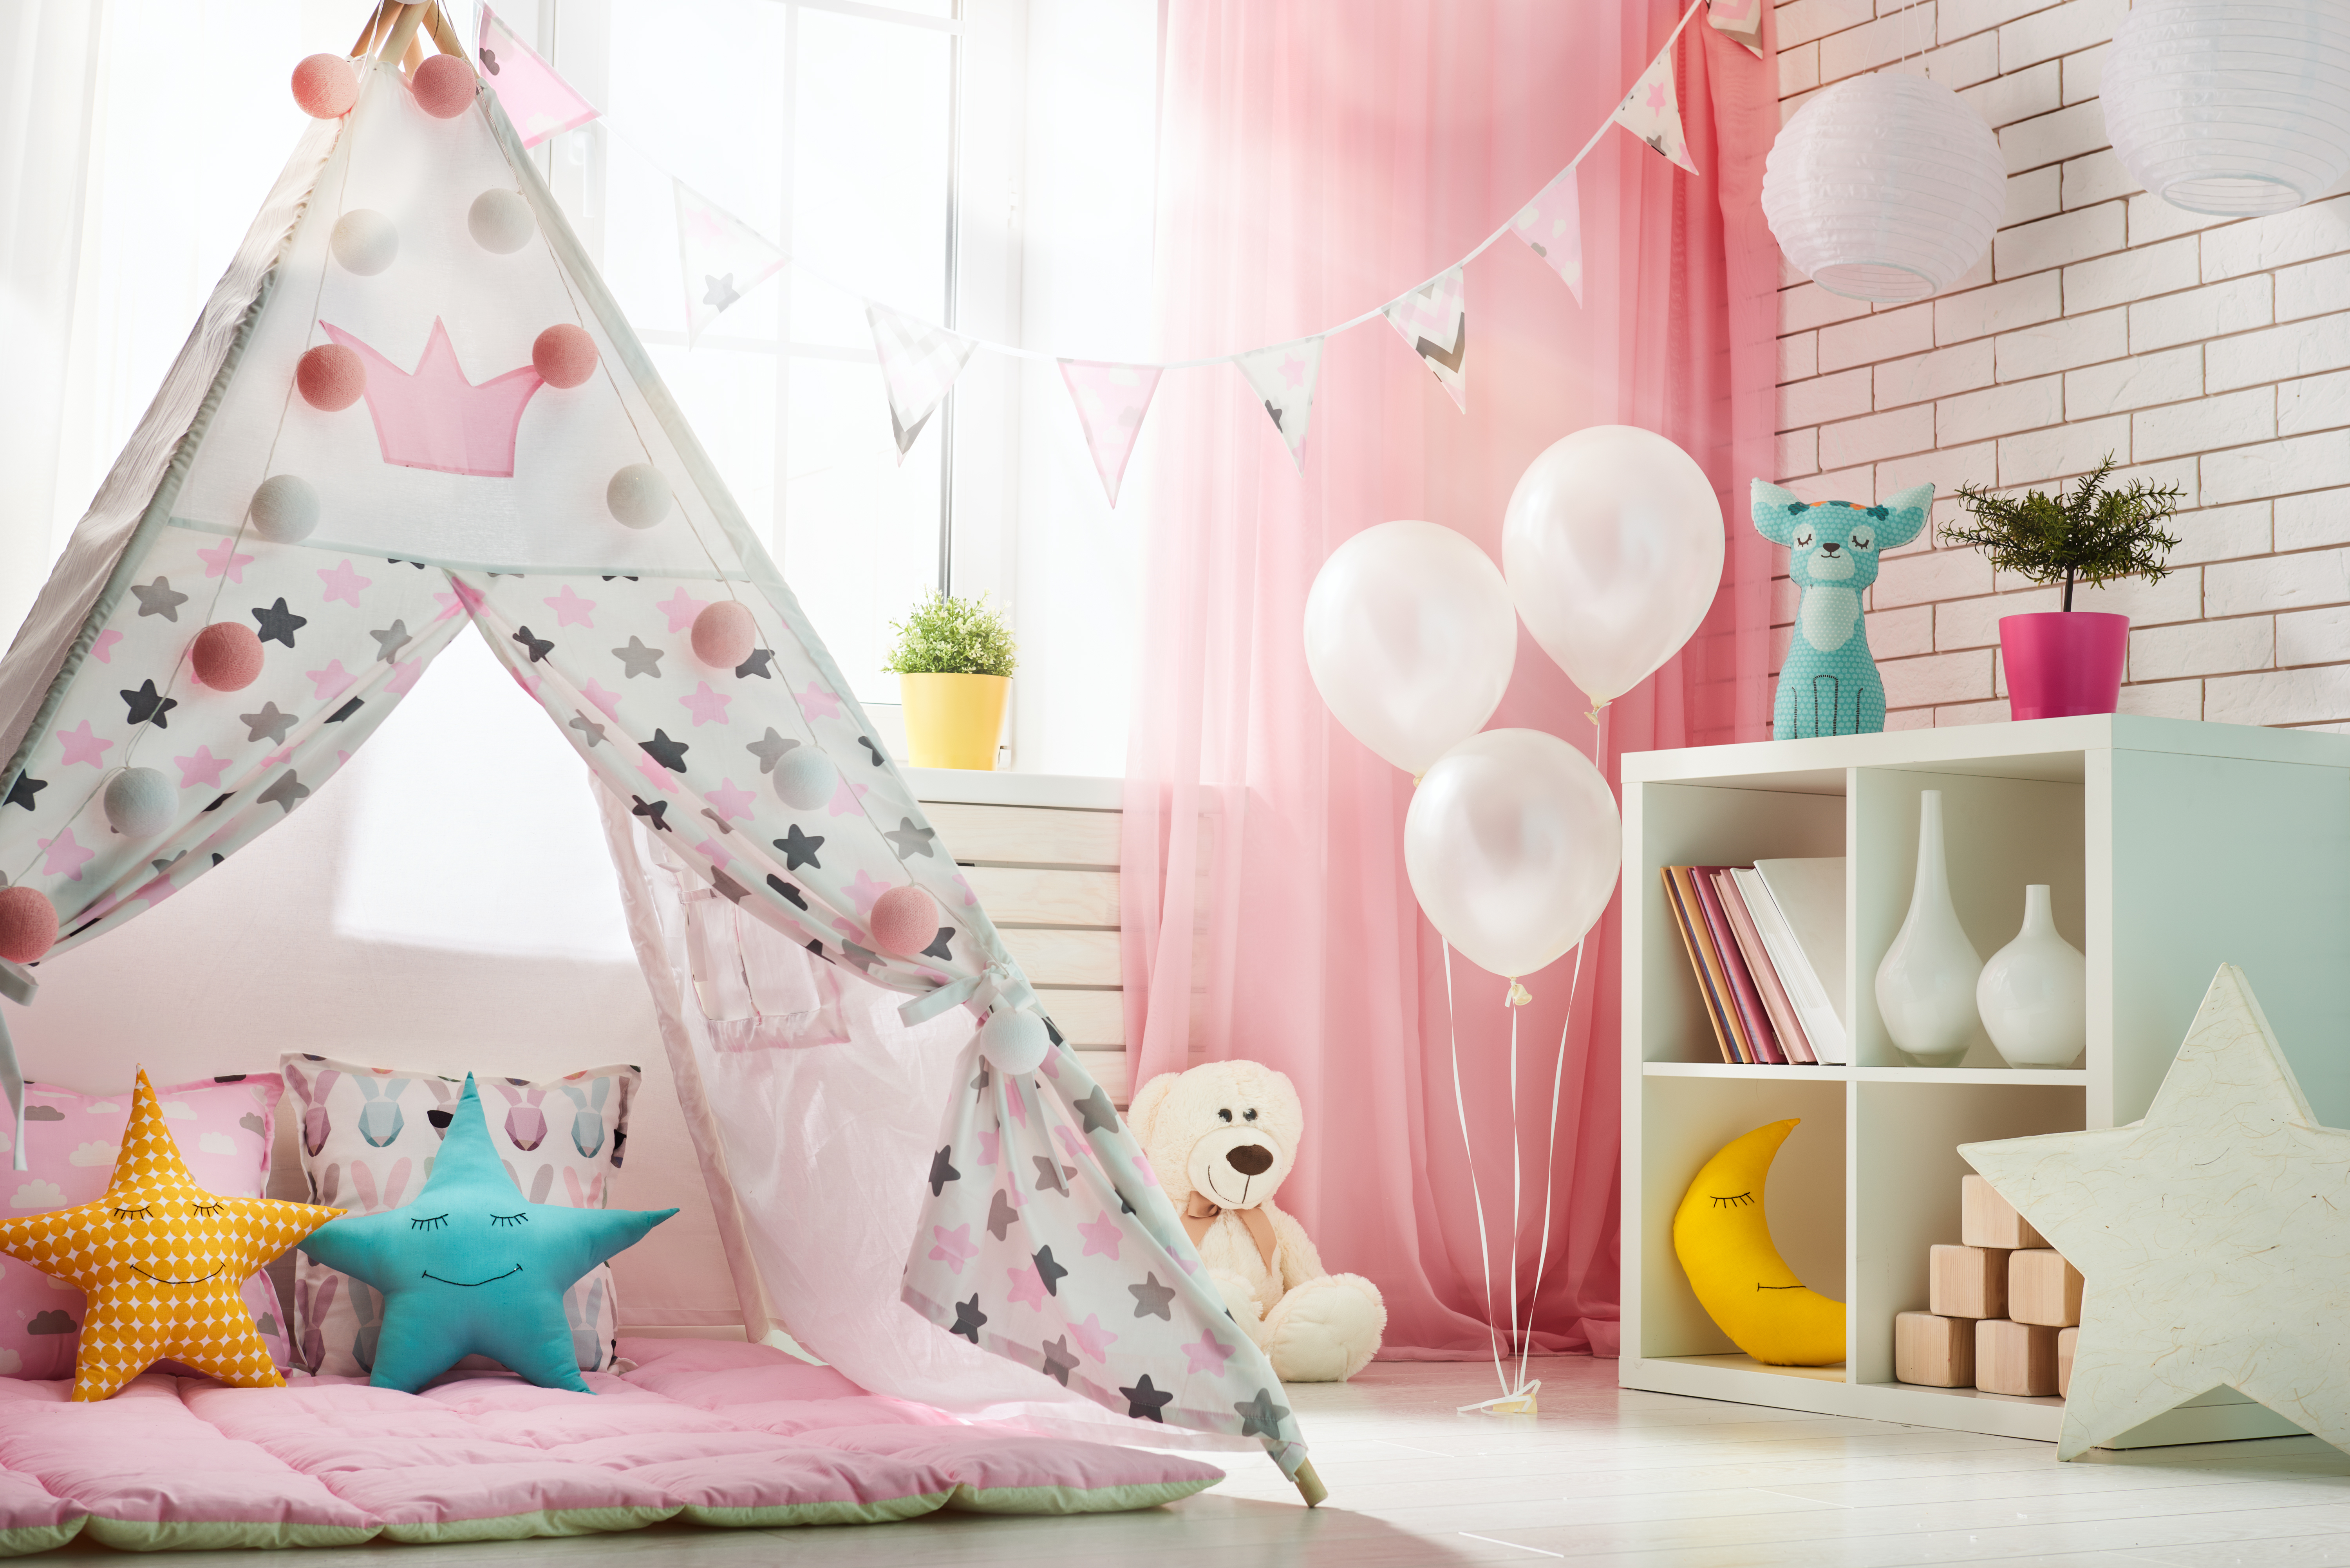 Spacious children room with play tent for girl | Source: Shutterstock